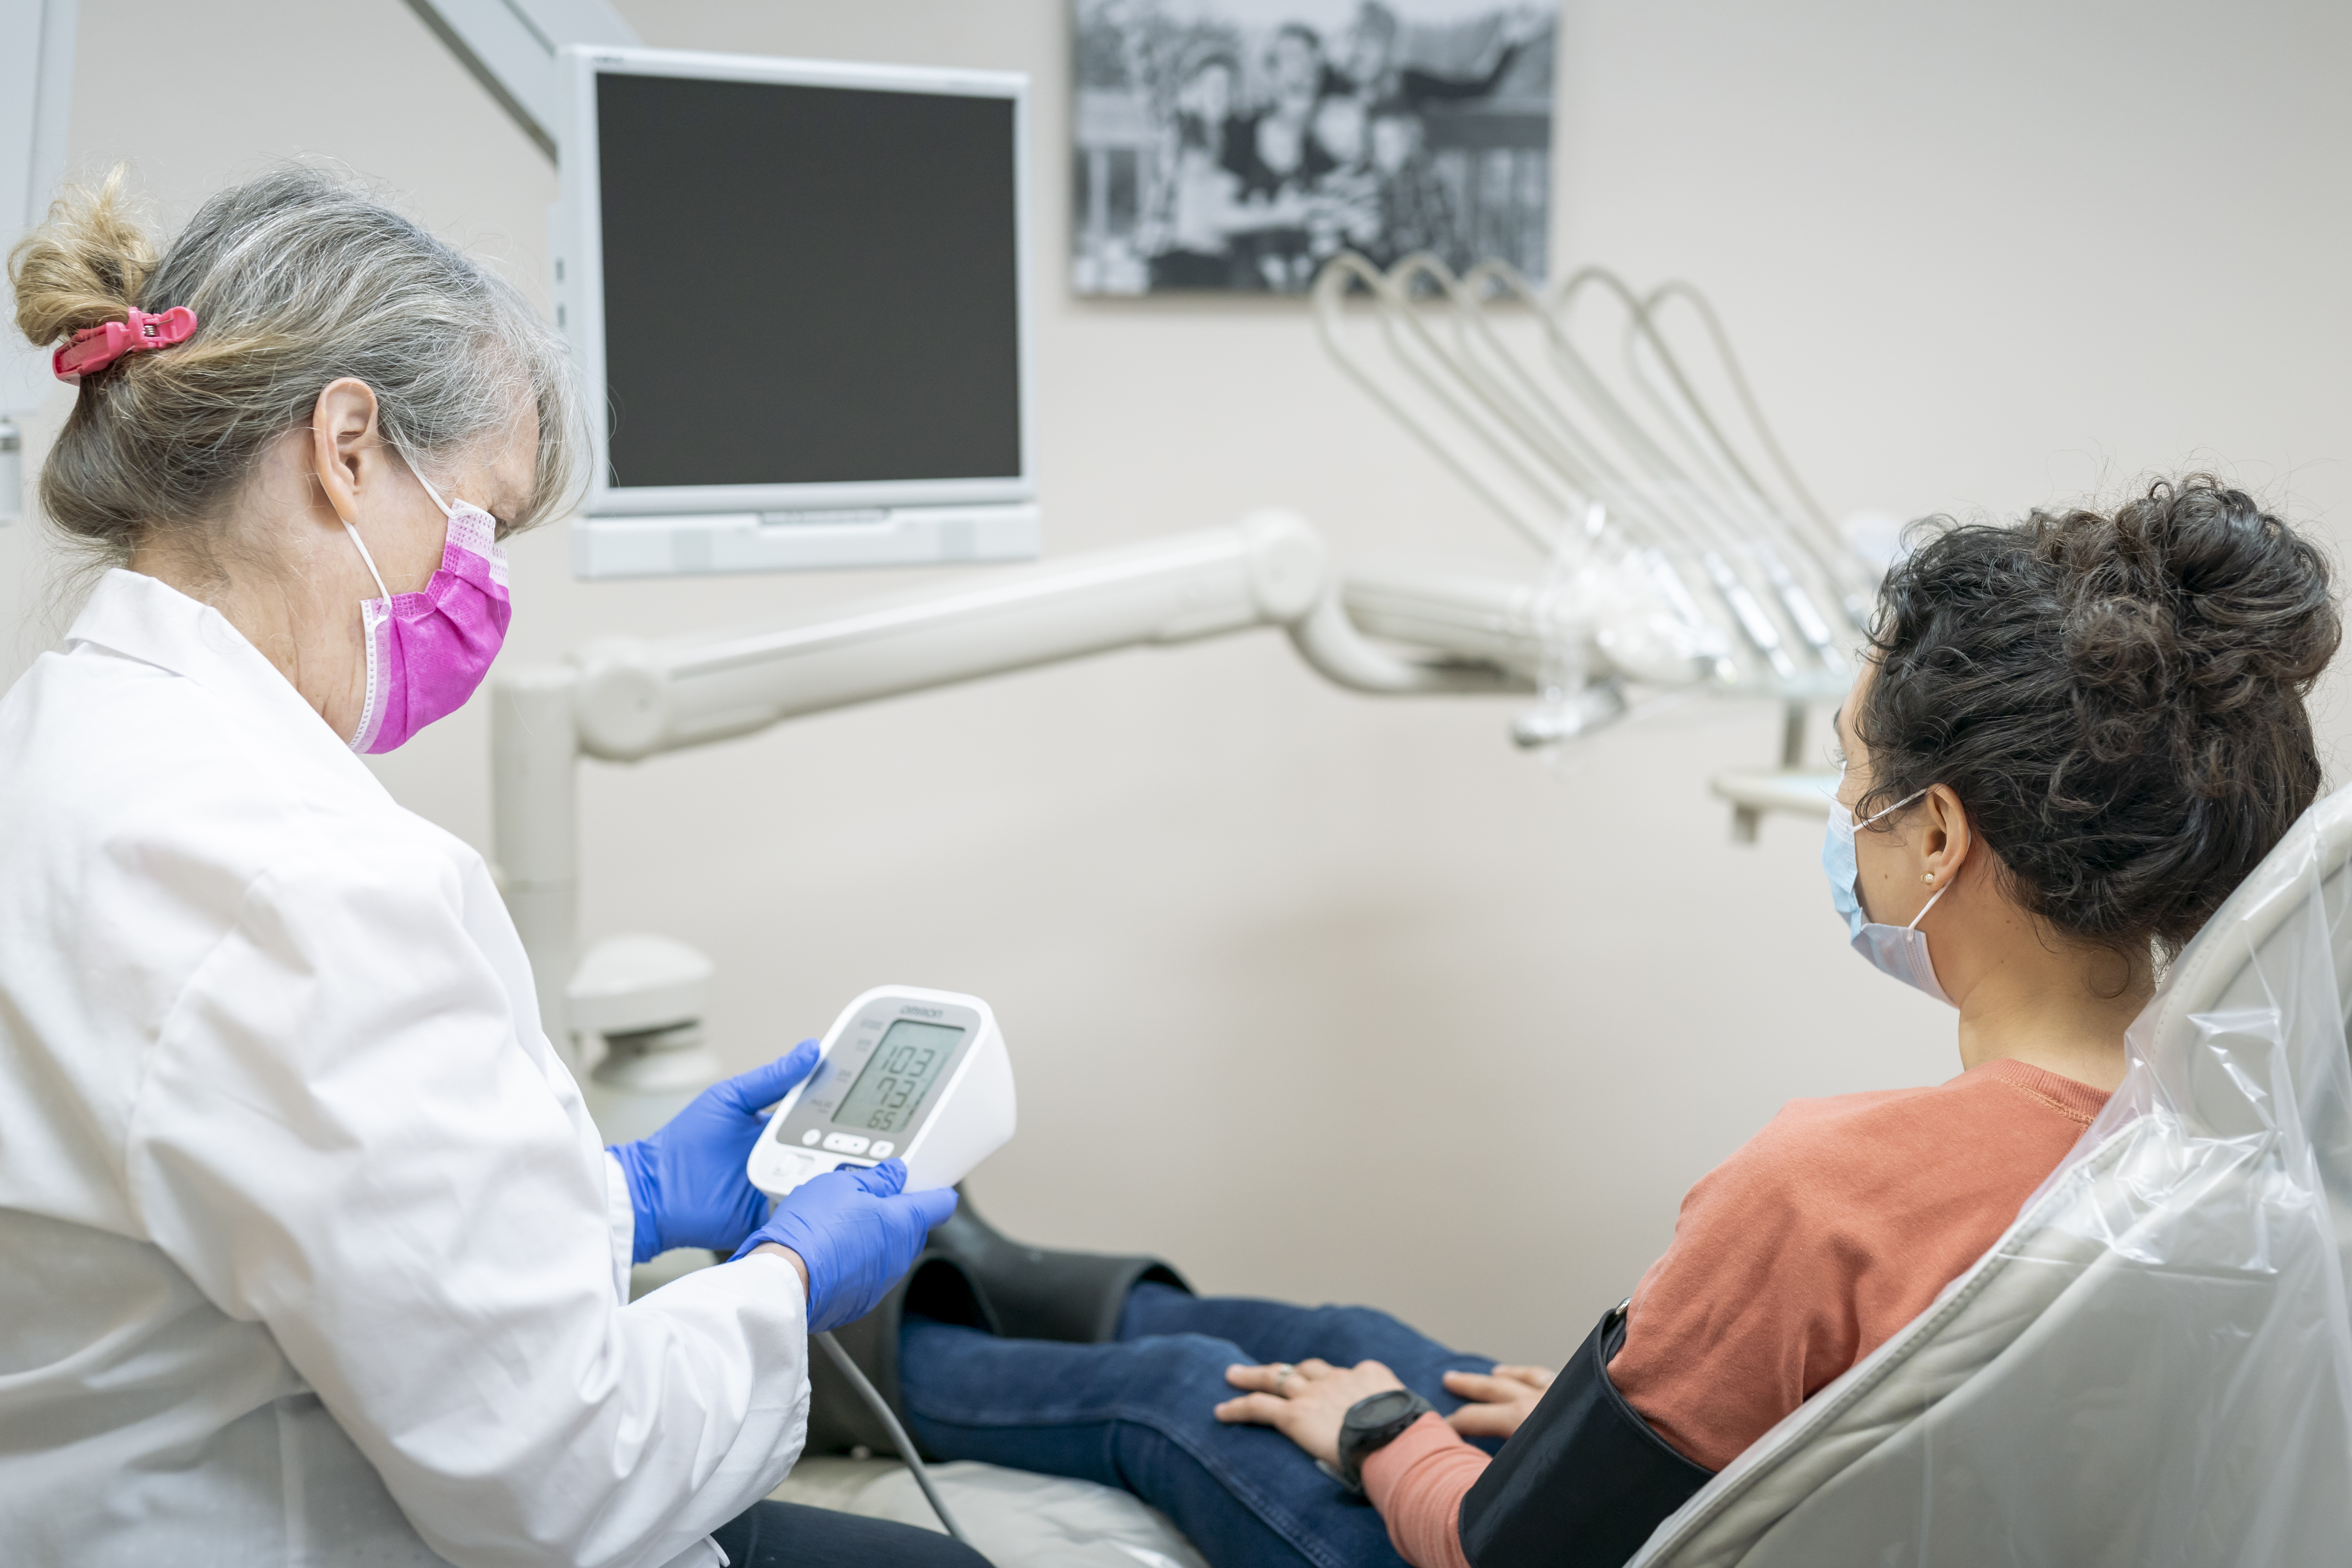 John F. Rink DDS, AAACD Blog | Why Do Dental Offices Take Blood Pressure Before Cleanings and Treatment?